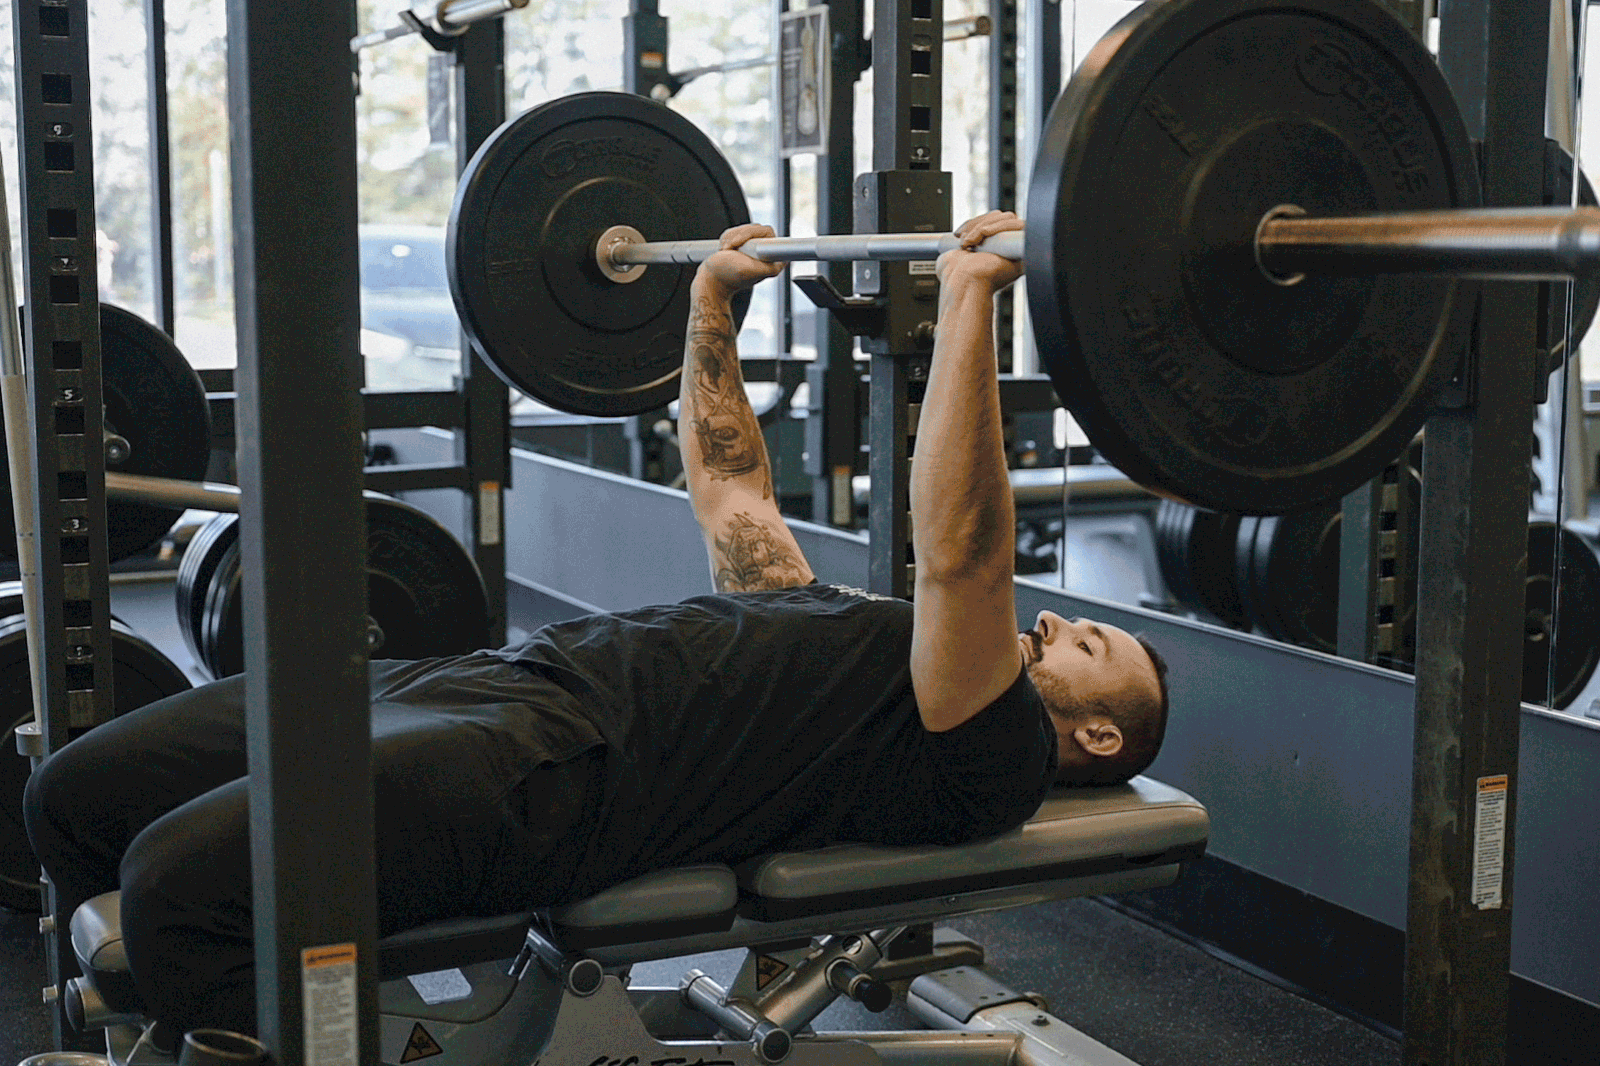 How to Increase Bench Press Weight: The Secret to Bigger PRs